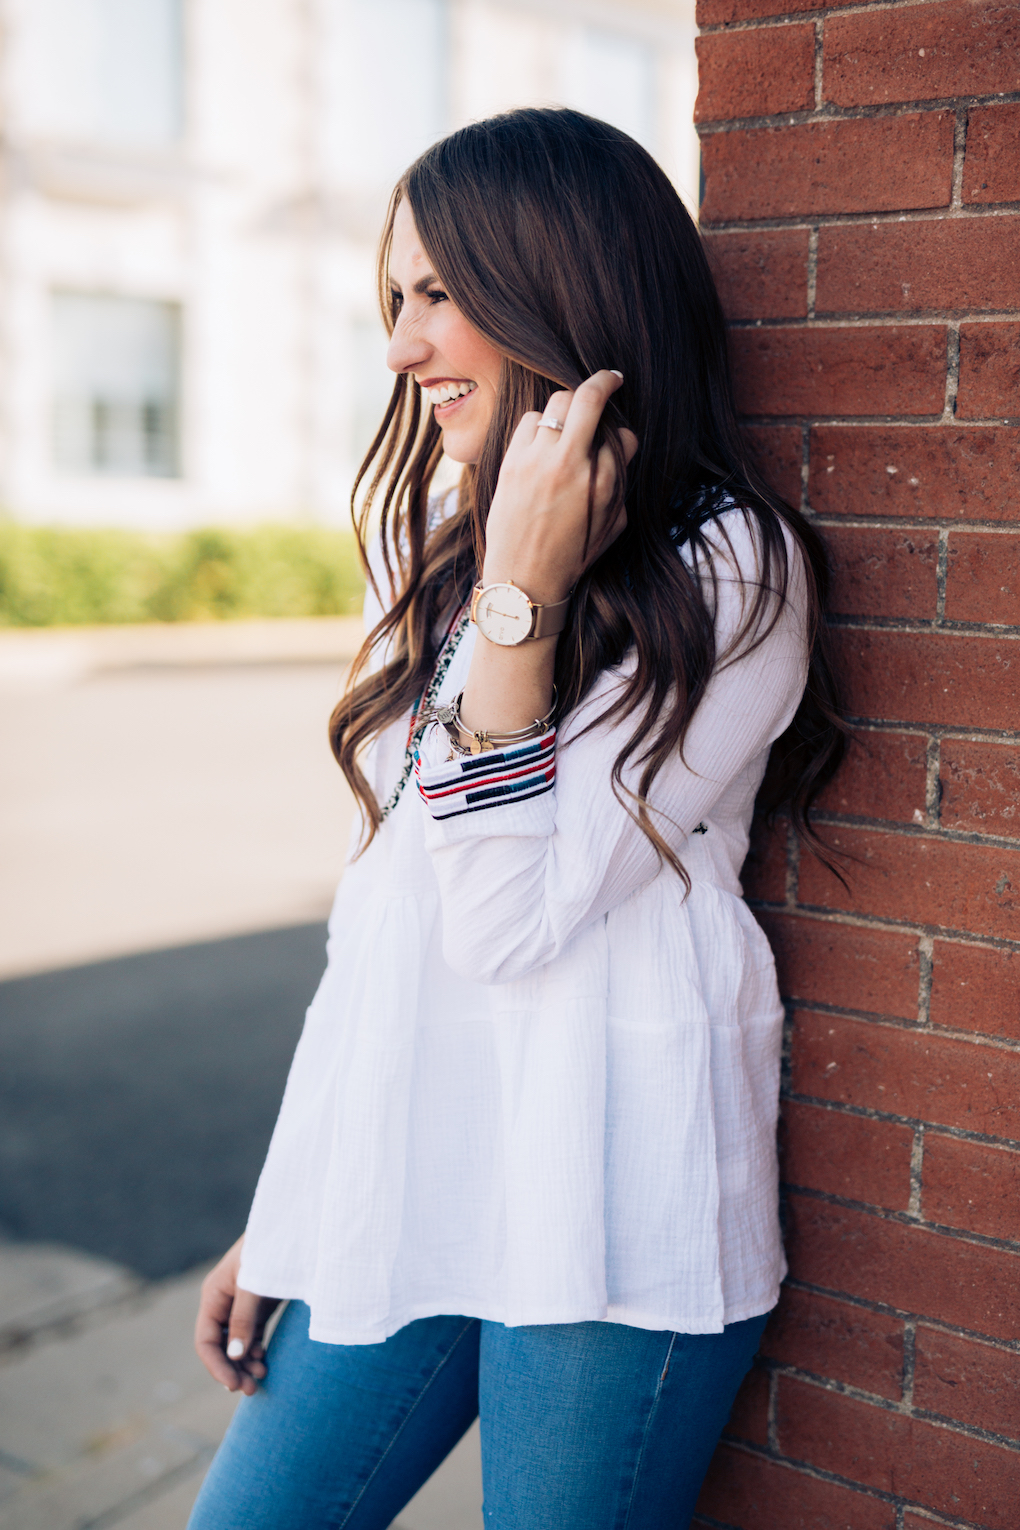 Girl in white peplum top with bright colored embroidery and skinny jeans with maroon booties and arvo watch with alex and ani bracelets